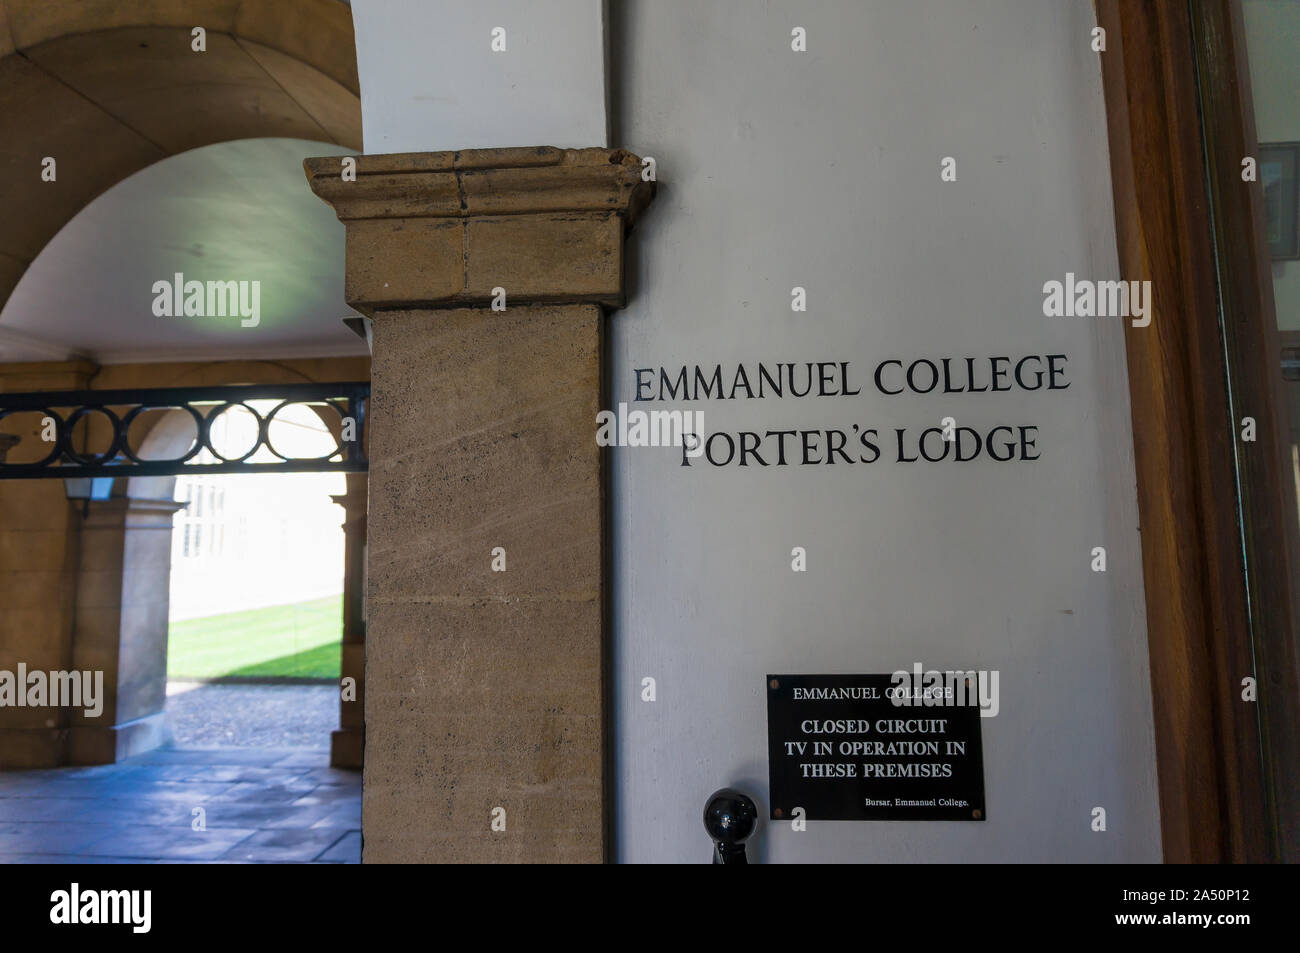 Emmanuel College gardens. Magnificent Cambridge University Courtyard with Spectacular Architecture Stock Photo